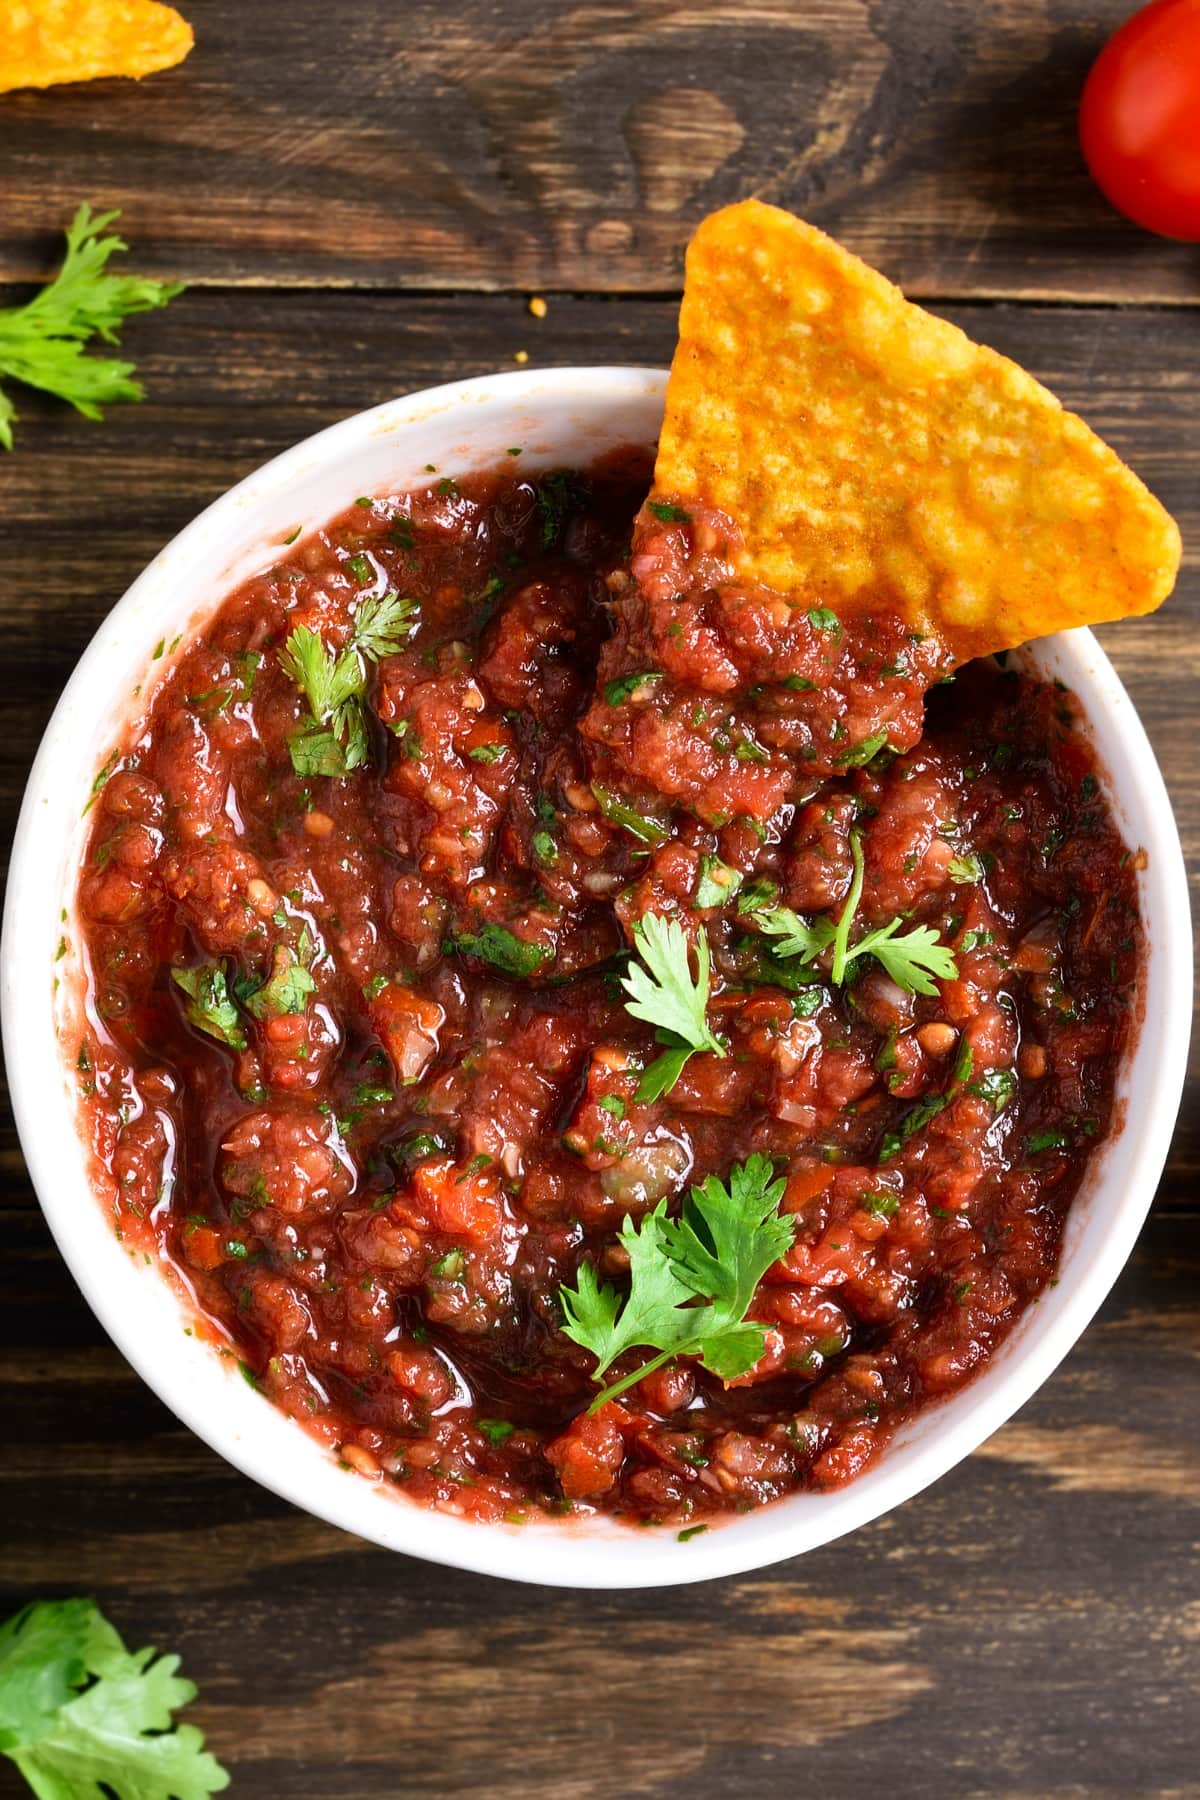 Bowl of homemade taco salsa with cilantro and chips